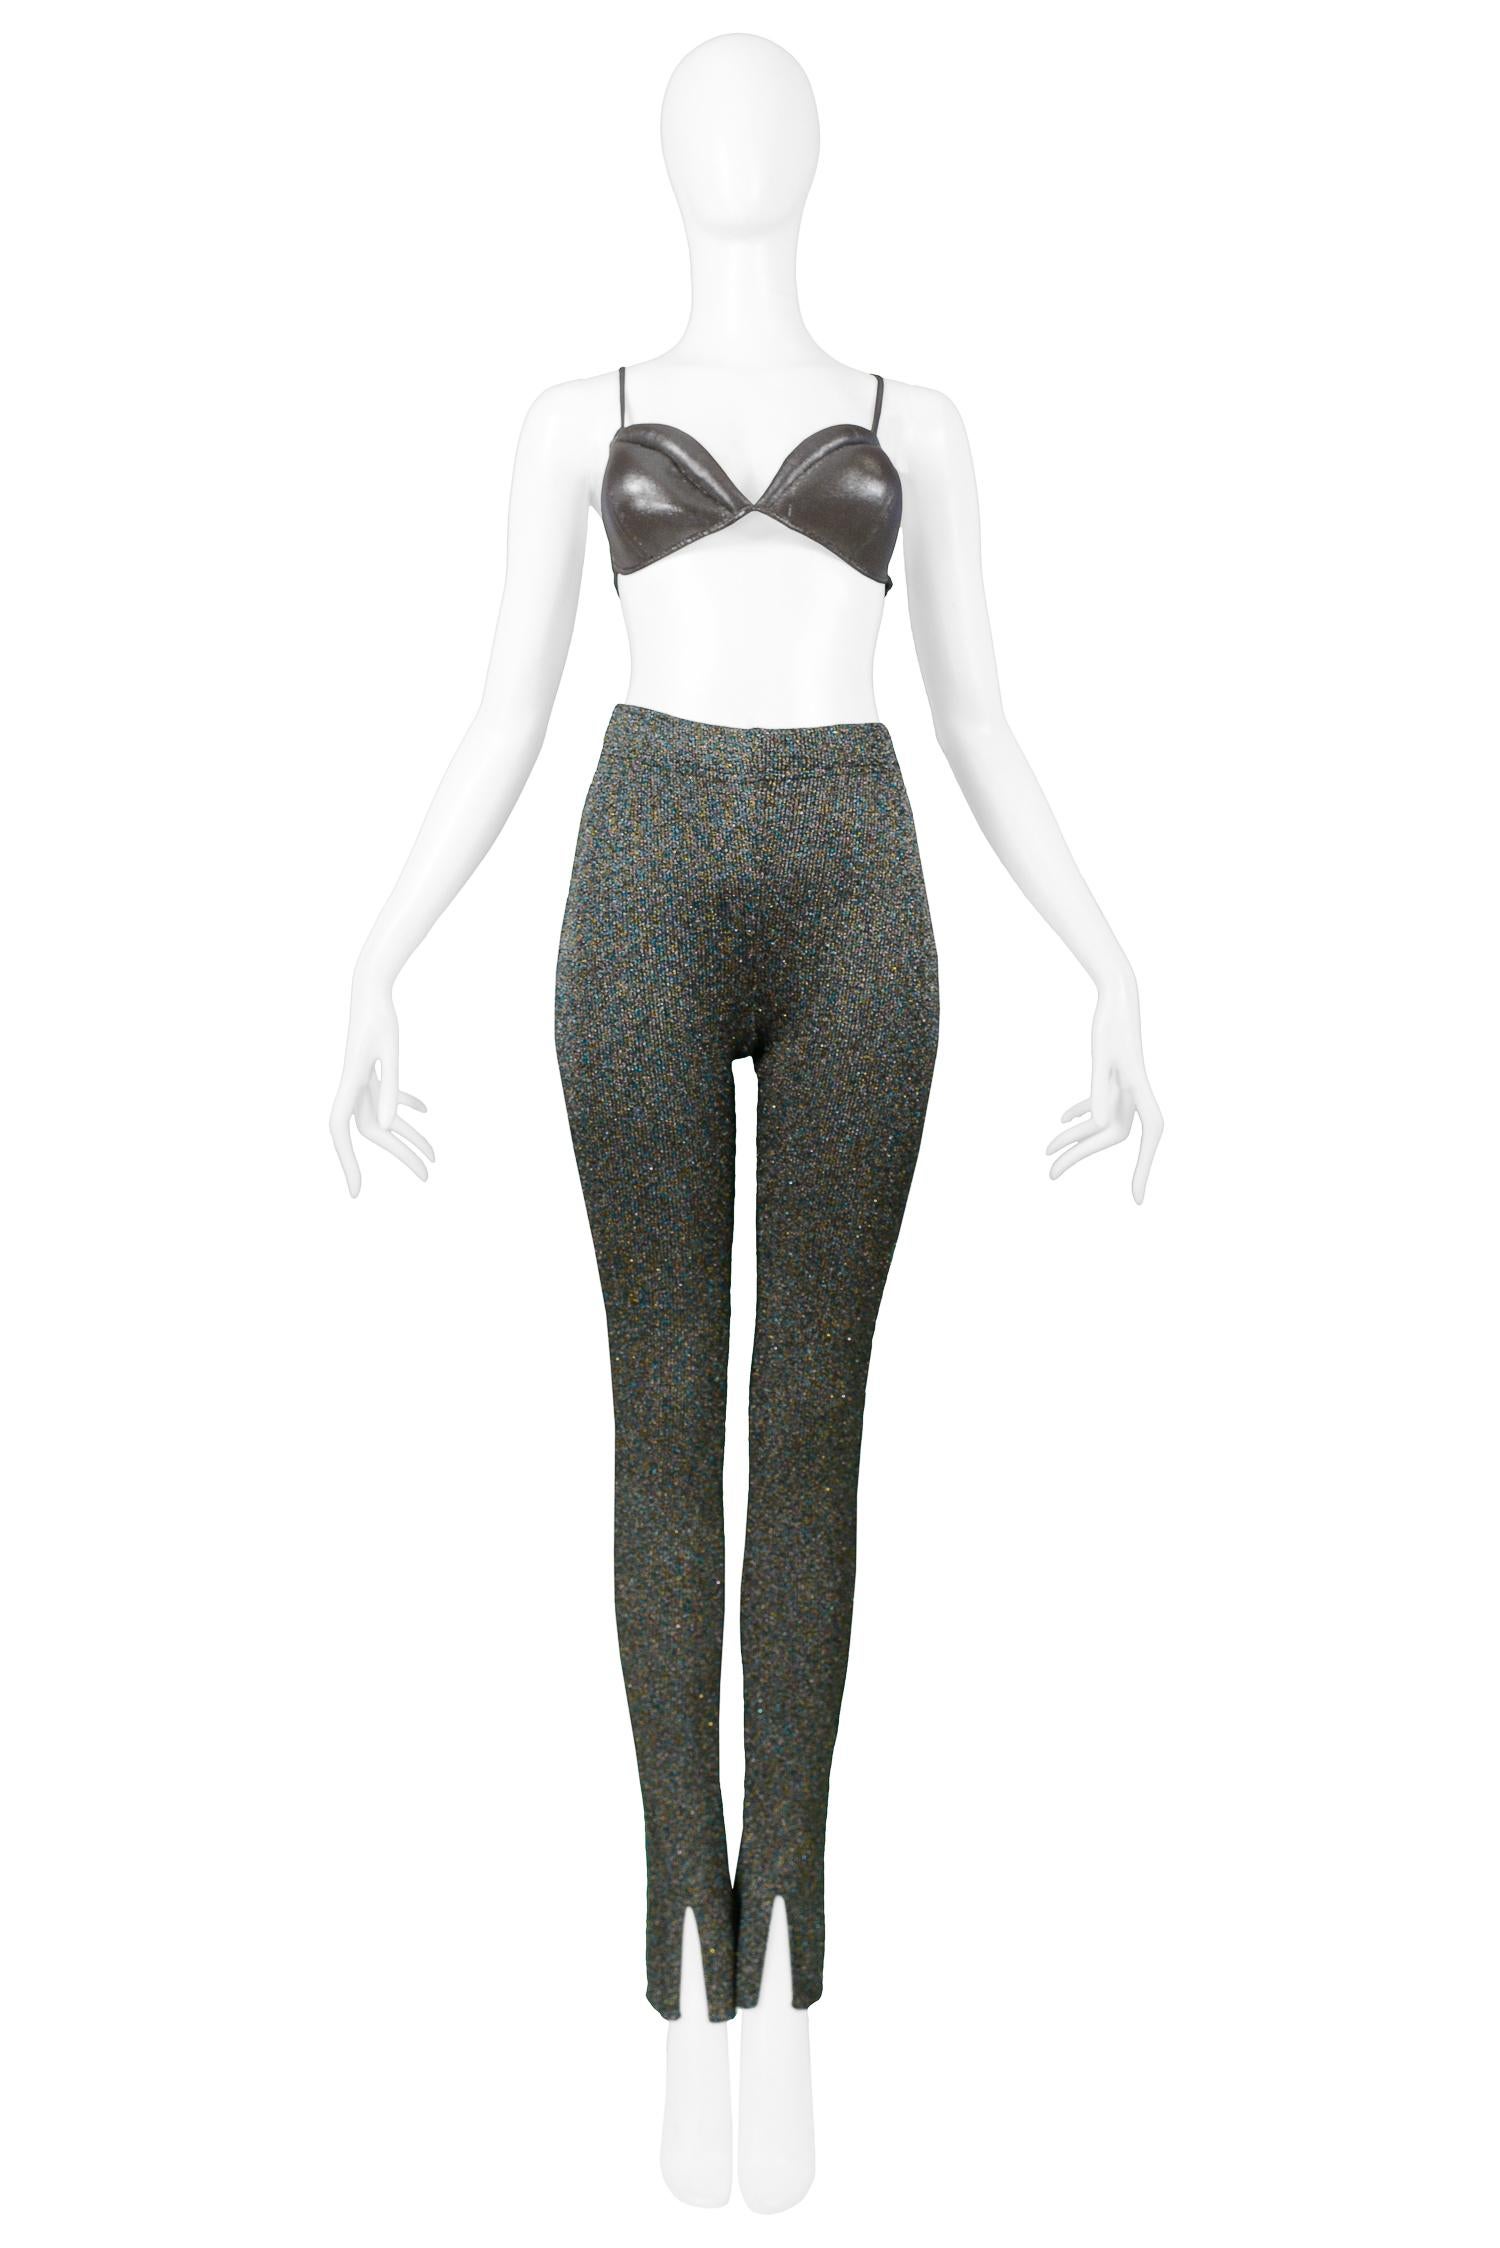 Vintage Rifat Ozbek silver metallic bra, leggings, and see-through blouse ensemble. The bra features metallic pewter molded / padded bra with elastic back for an easy fit. Leggings feature metallic pewter knit, high waist, and slightly flared cuff